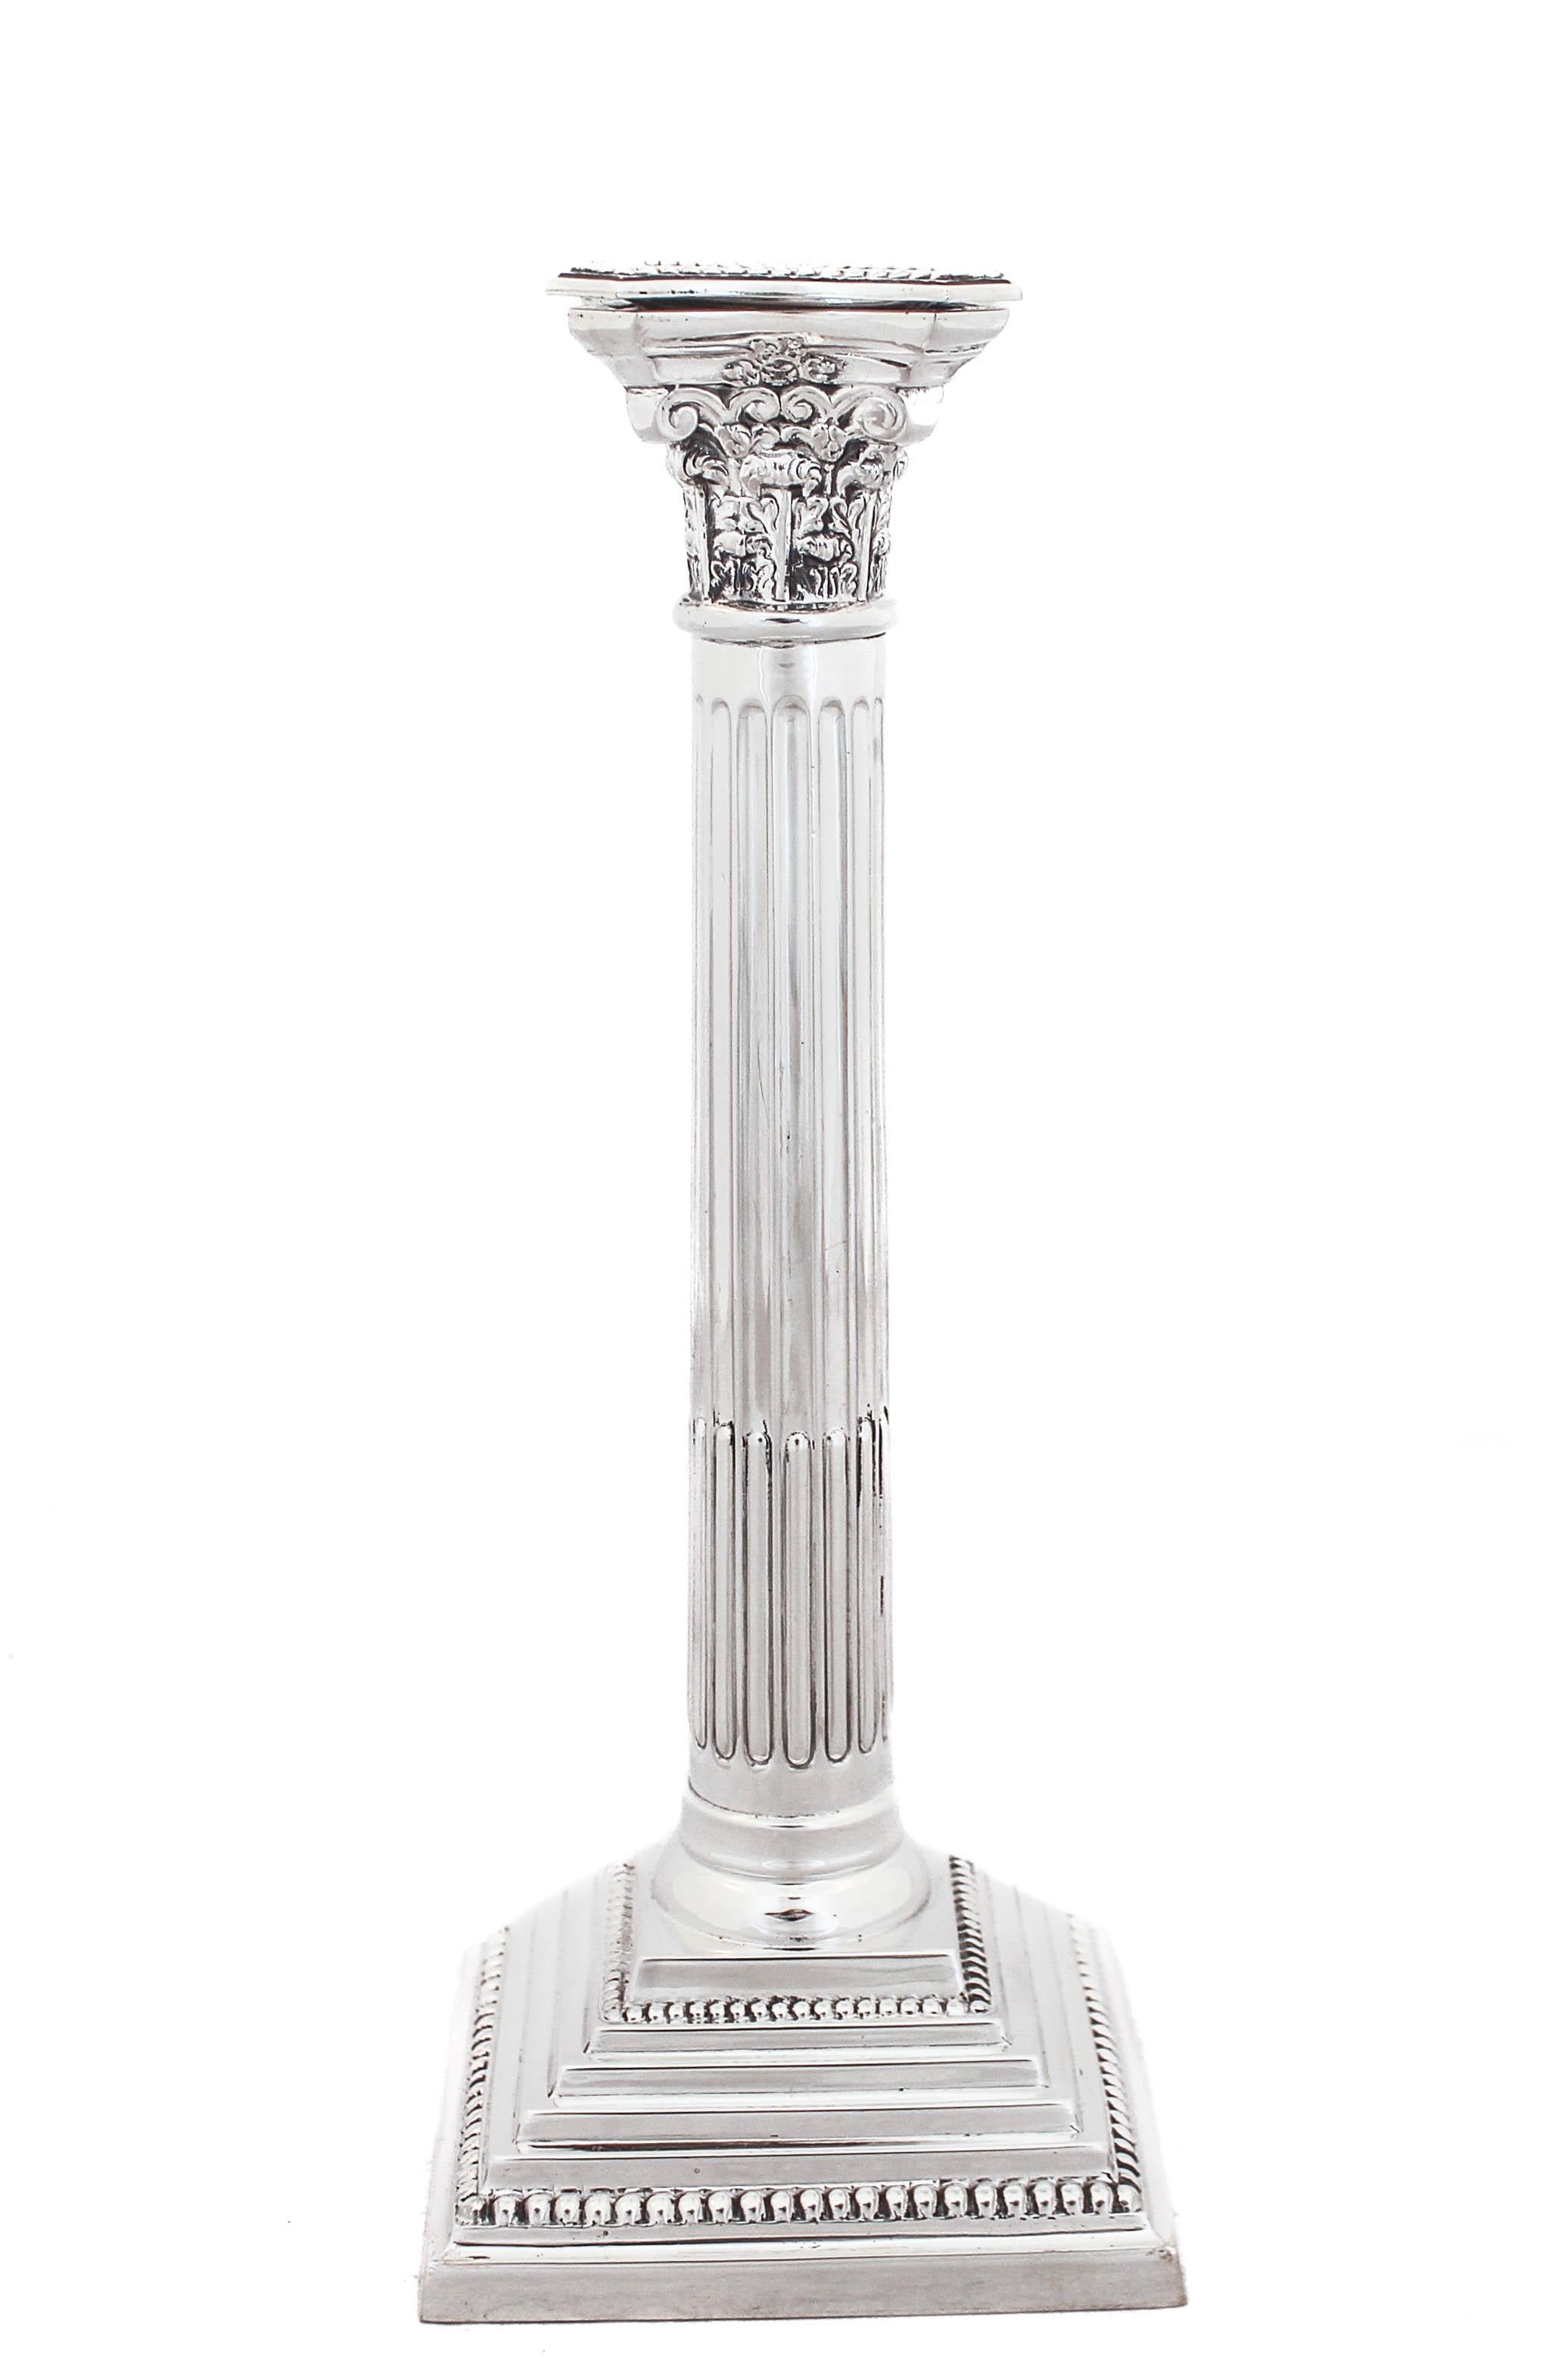 Being offered is a pair of sterling silver candlesticks made in London, England in 1956.  They are designed in the neoclassical style, Corinthian to be exact.  The word 